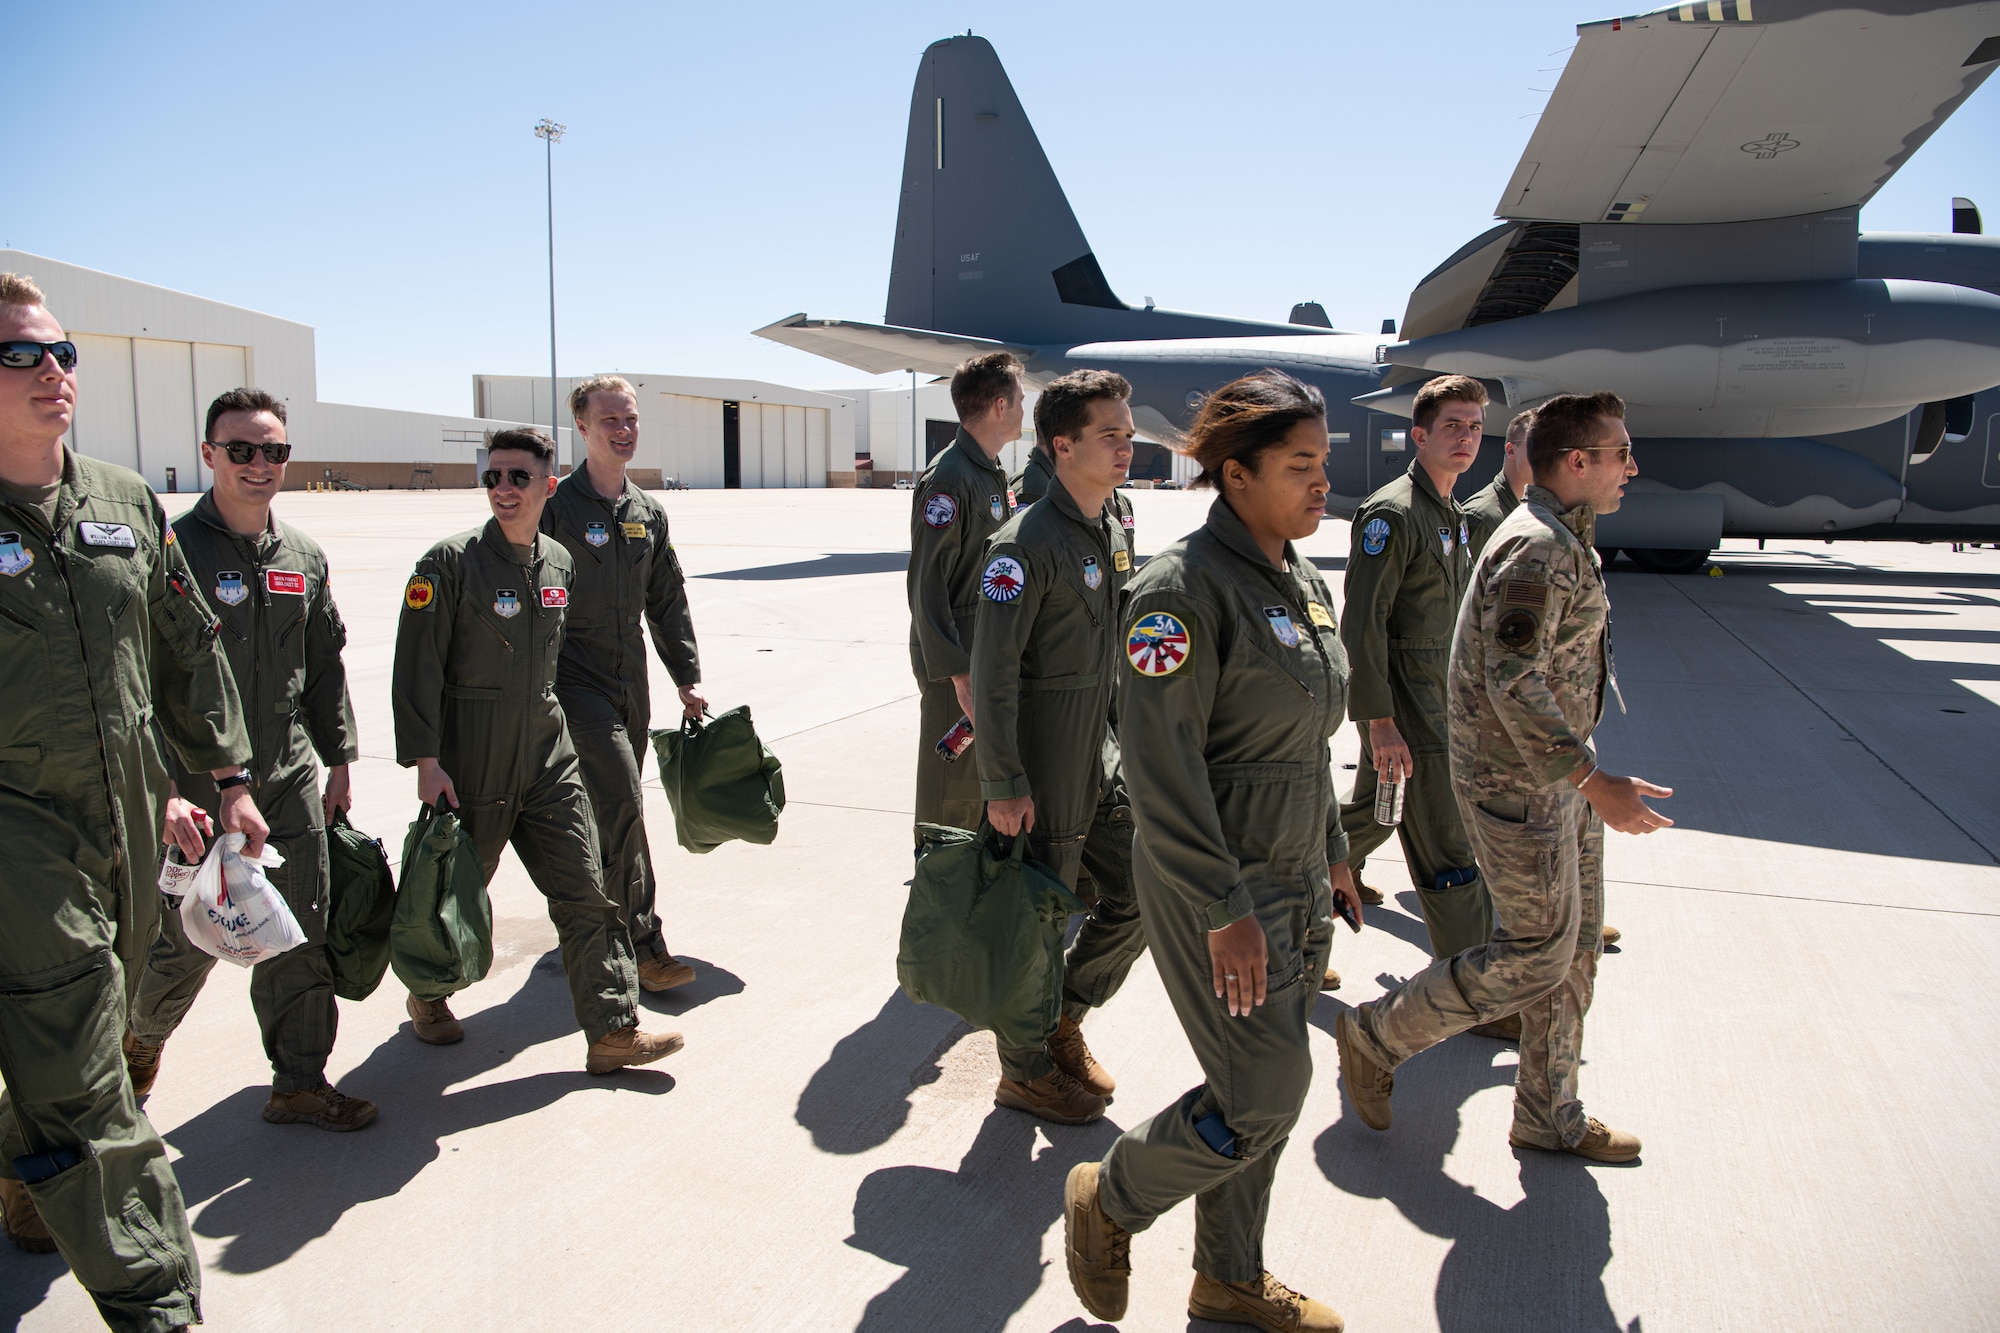 Airmen in camouflage uniforms and flight suits walk by a C-130 cargo airplane on a flight line.